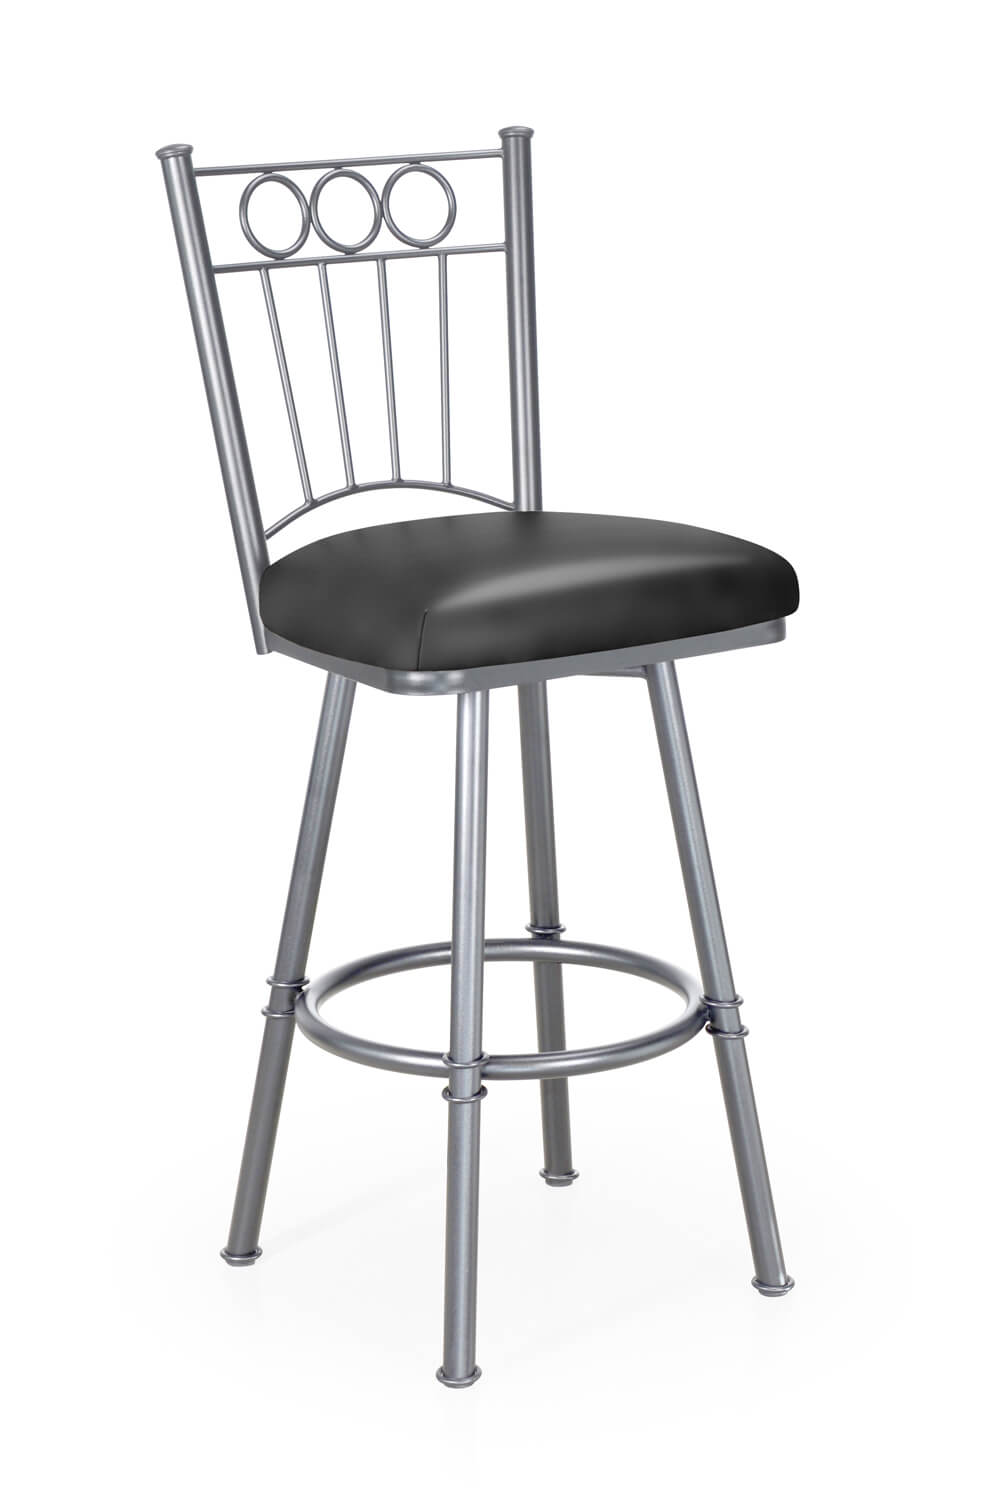 Trica's Charles Silver Traditional Swivel Bar Stool with Black Vinyl Seat Cushion